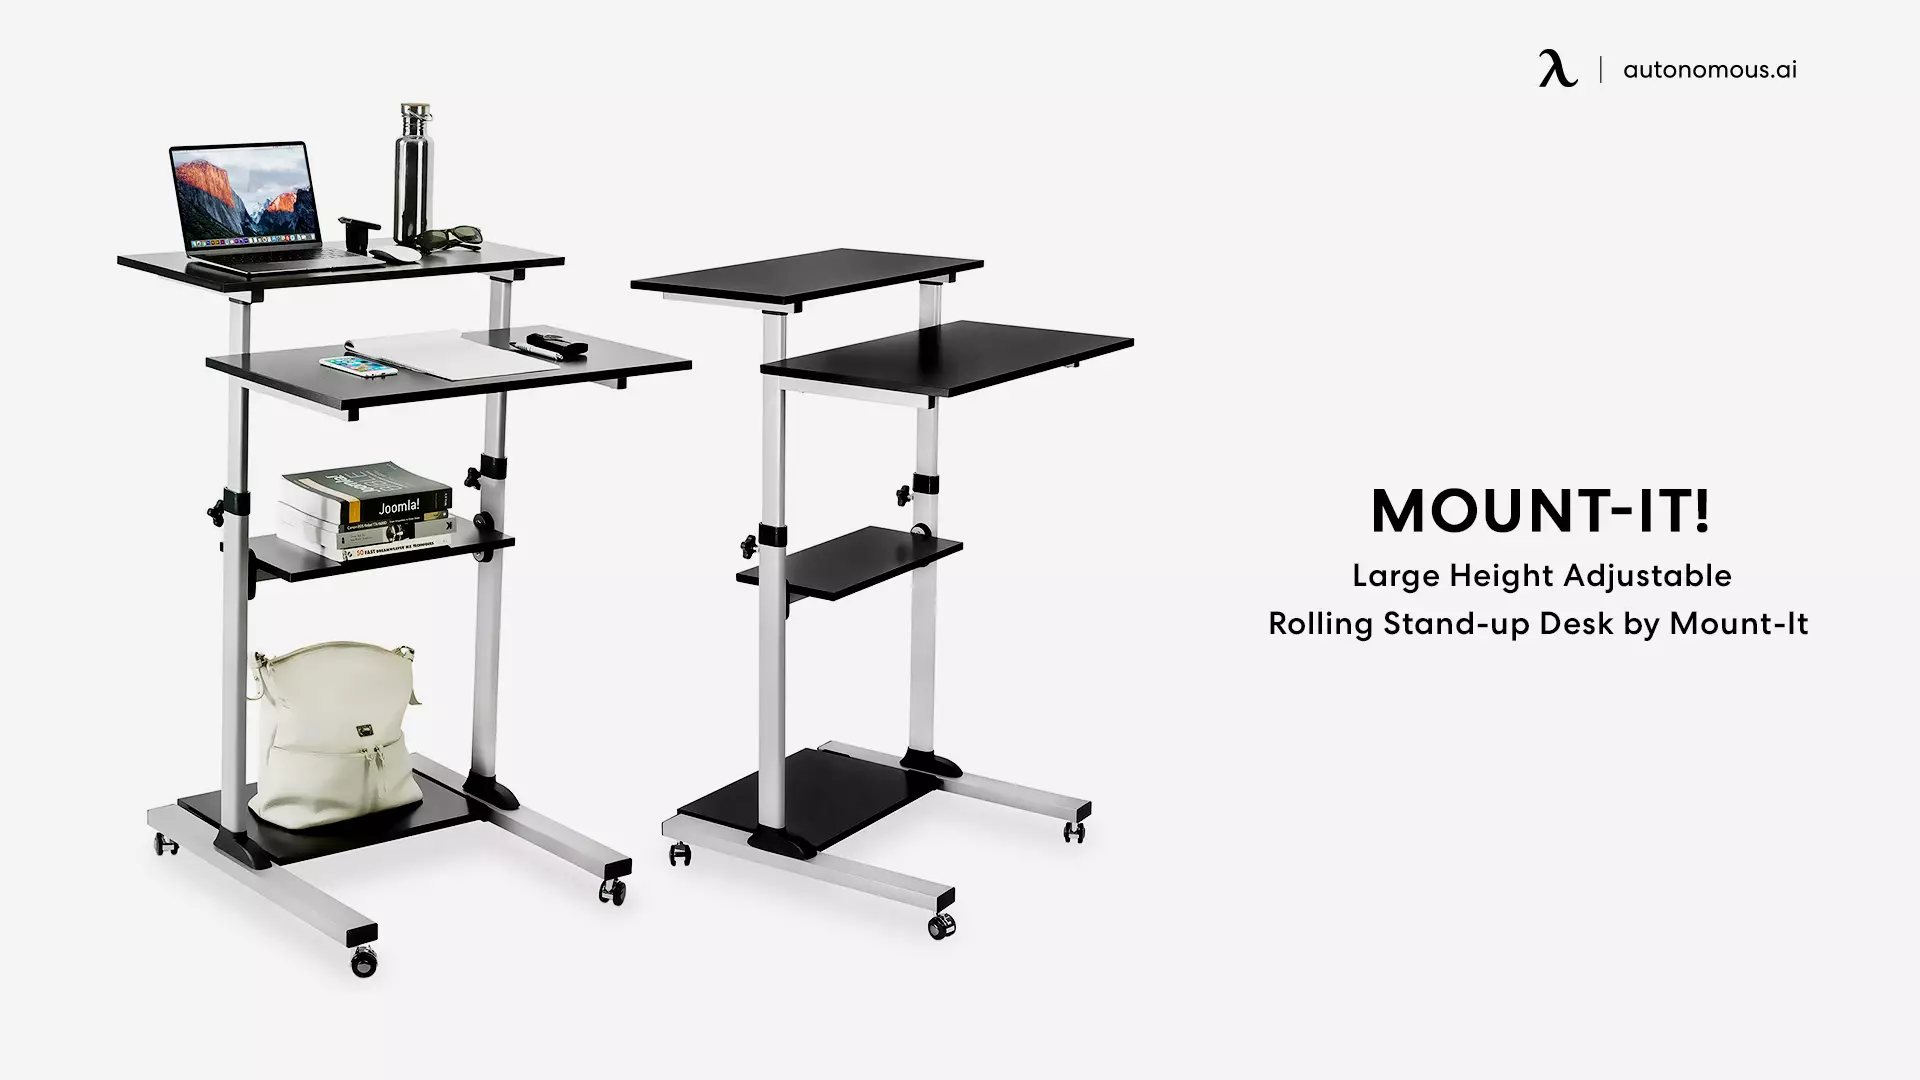 Large Height Adjustable Rolling Stand-up Desk by Mount-It!